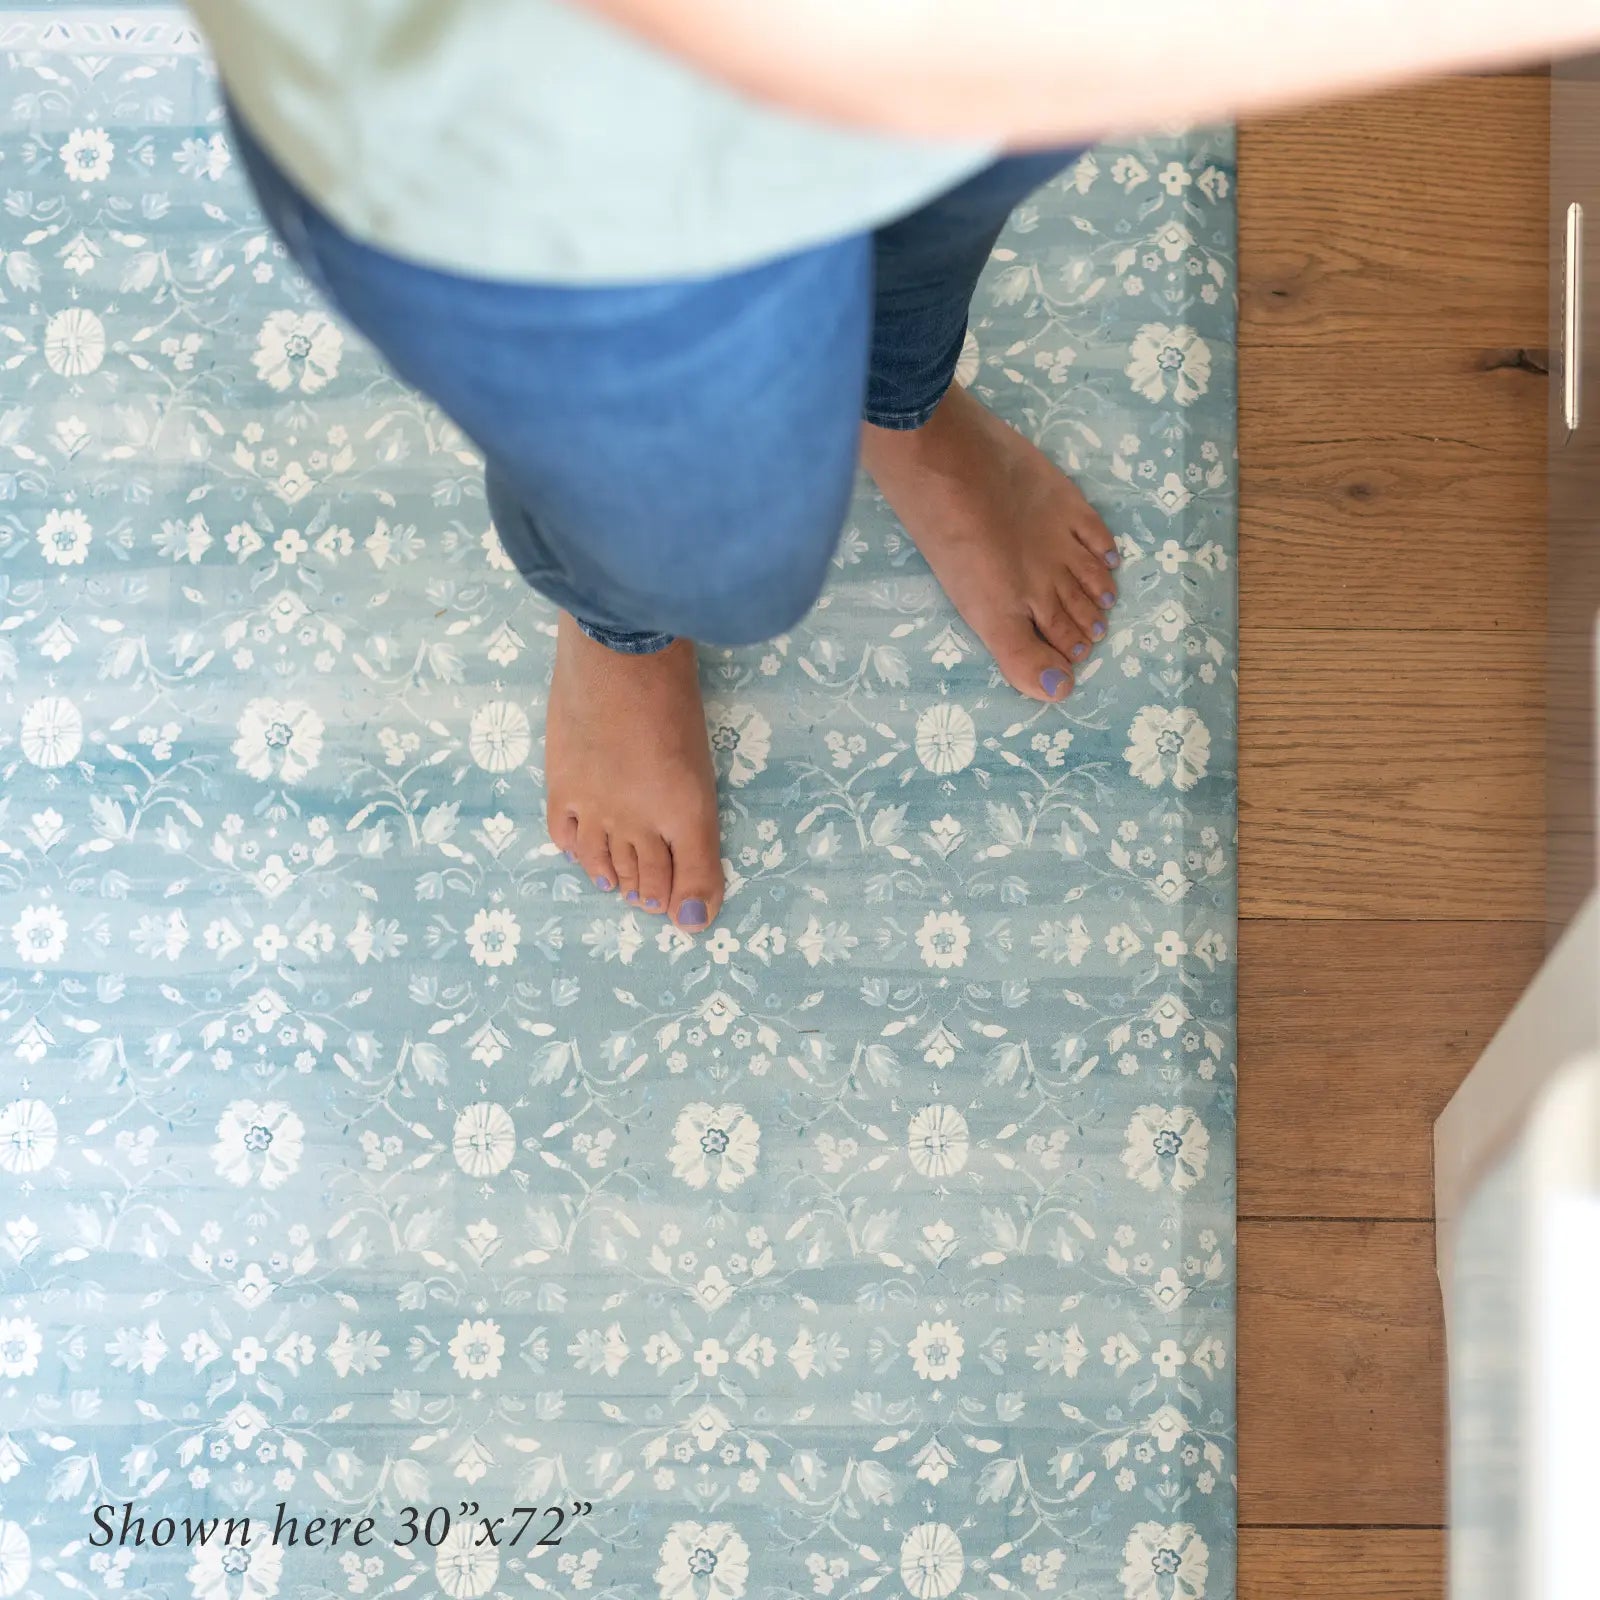 Nama standing mat Gemma sea blue floral shown from above in kitchen with womans feet shown in size 30x72